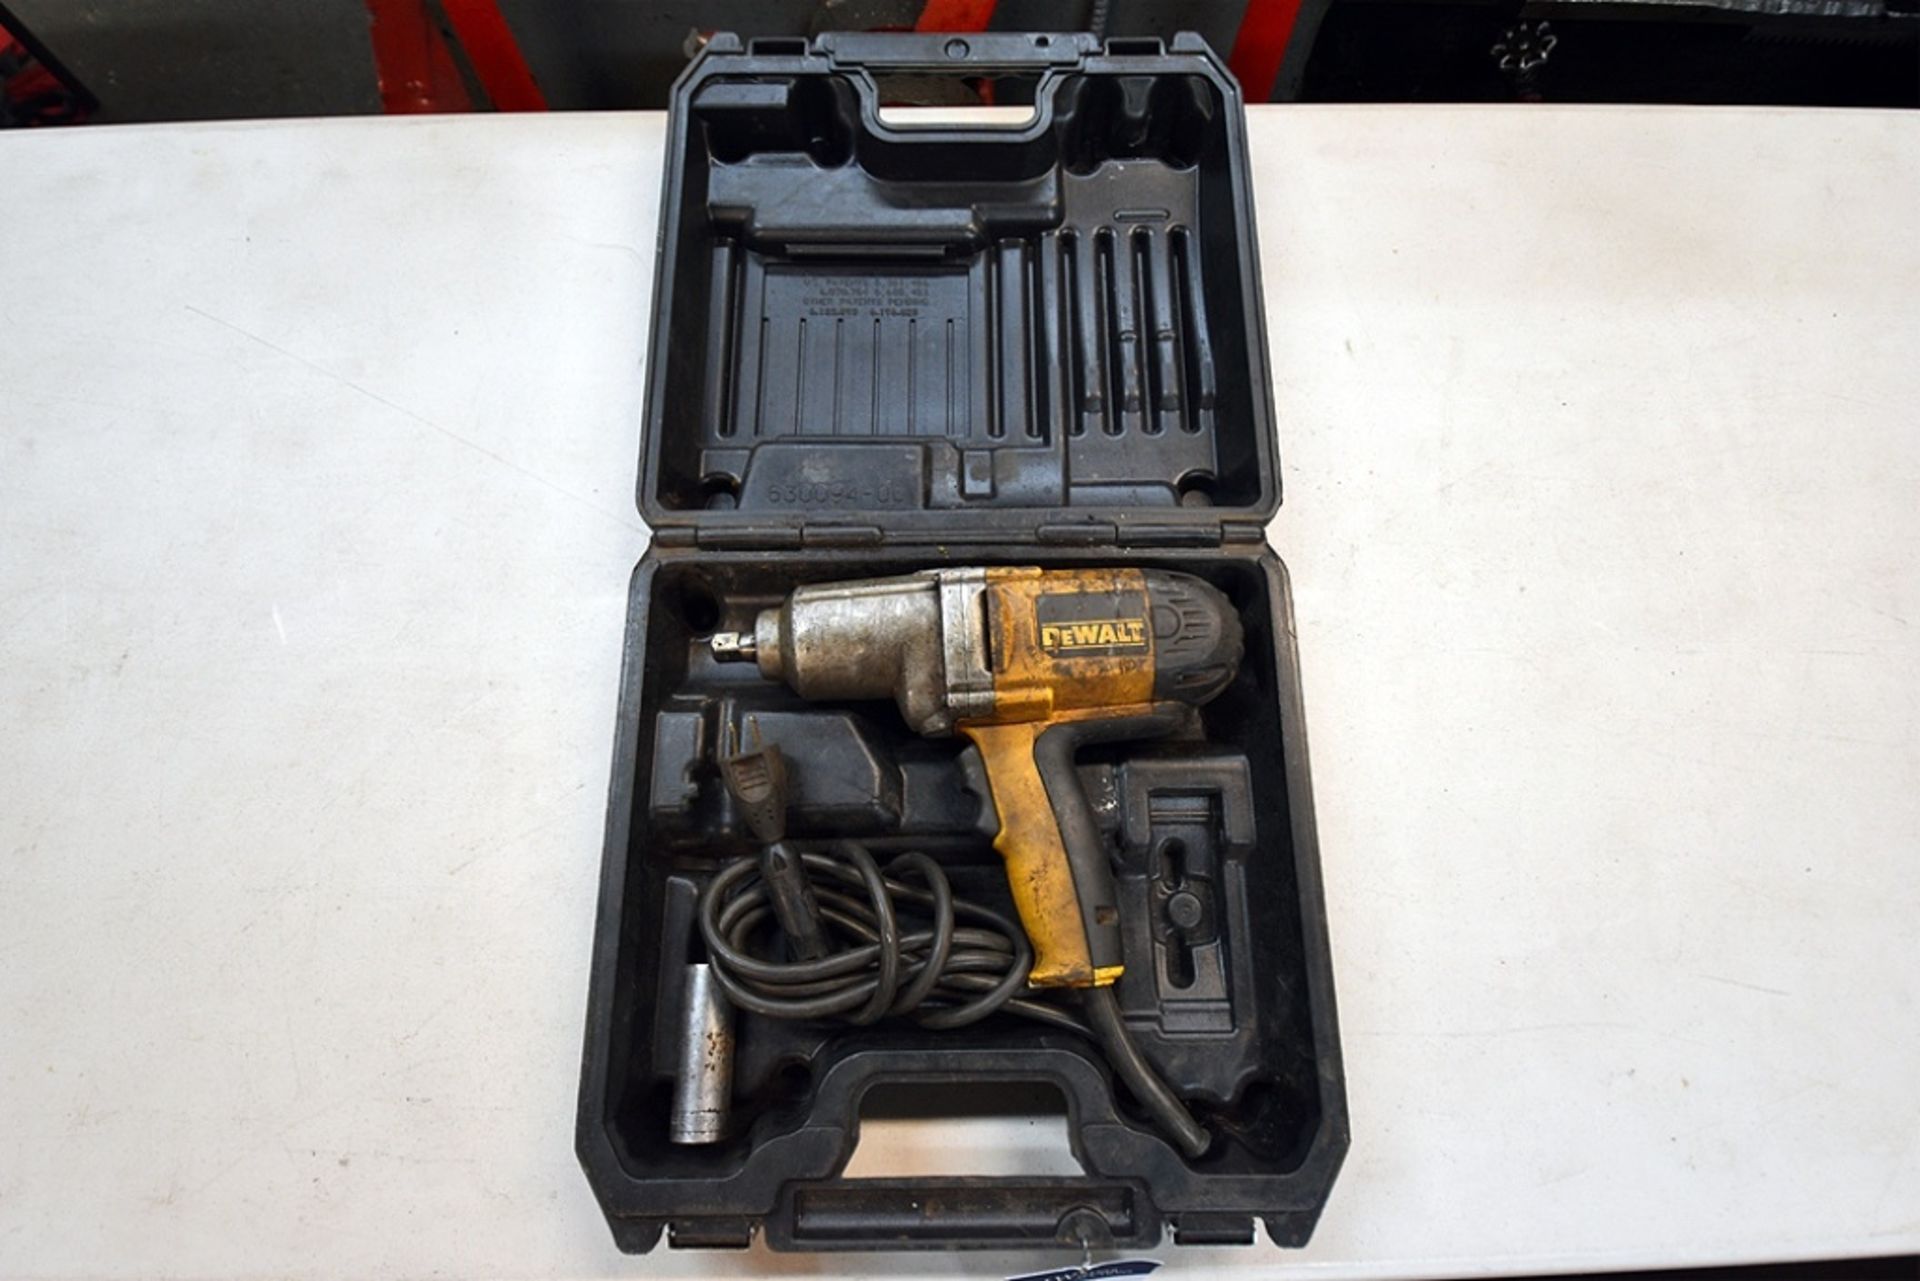 DeWalt DW292 1/2" Corded Impact Wrench w/ Case - Image 2 of 4